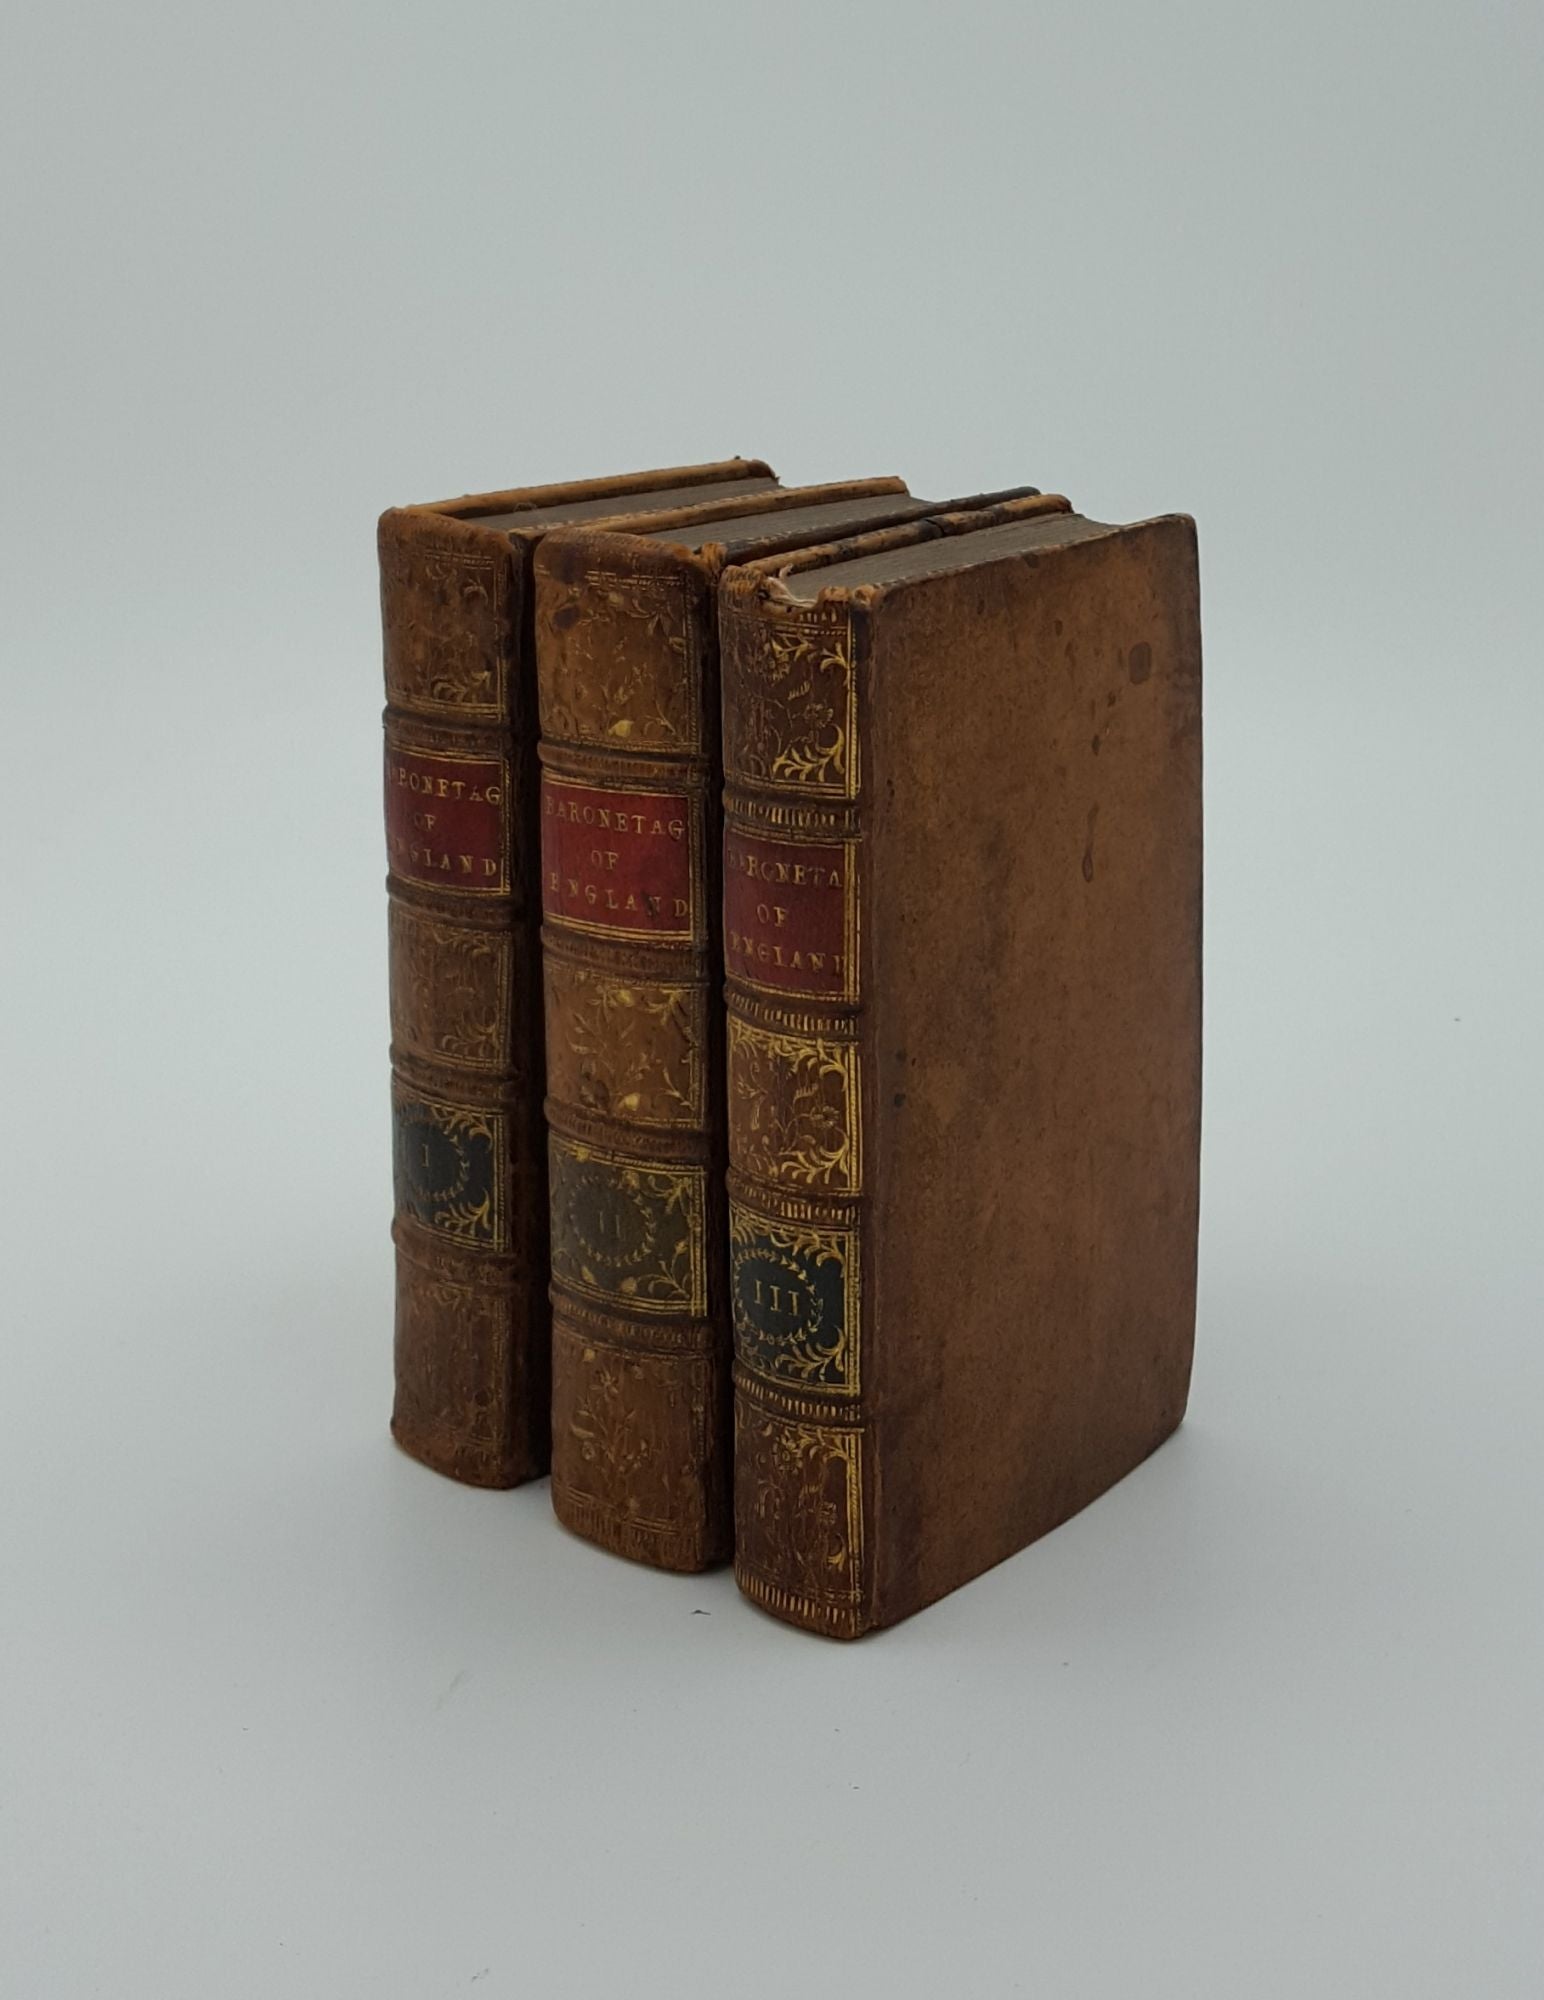 Anon - A New Baronetage of England or a Genealogical and Historical Account of the Present English Baronets... In Three Volumes